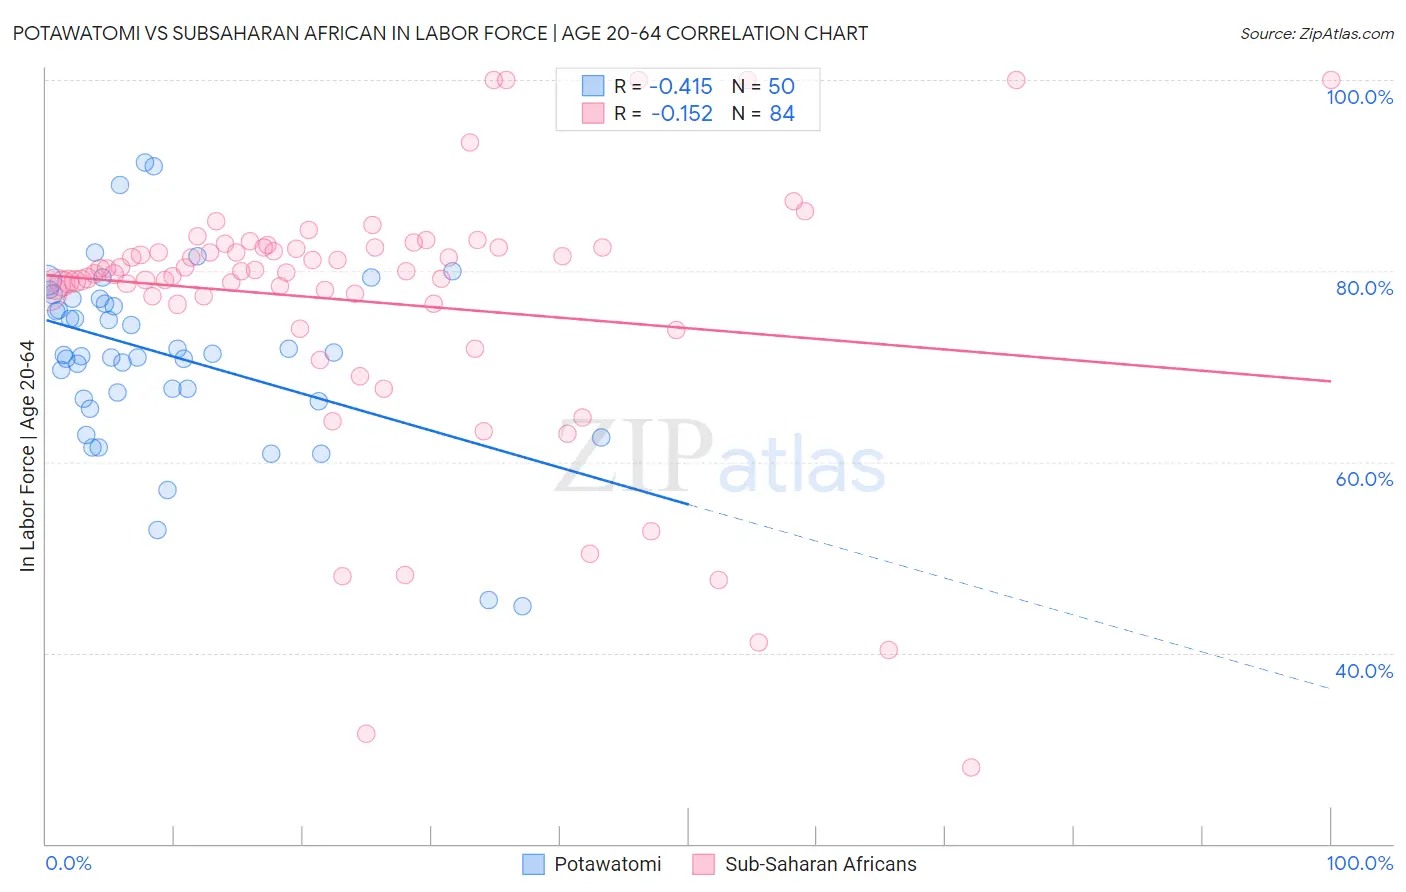 Potawatomi vs Subsaharan African In Labor Force | Age 20-64